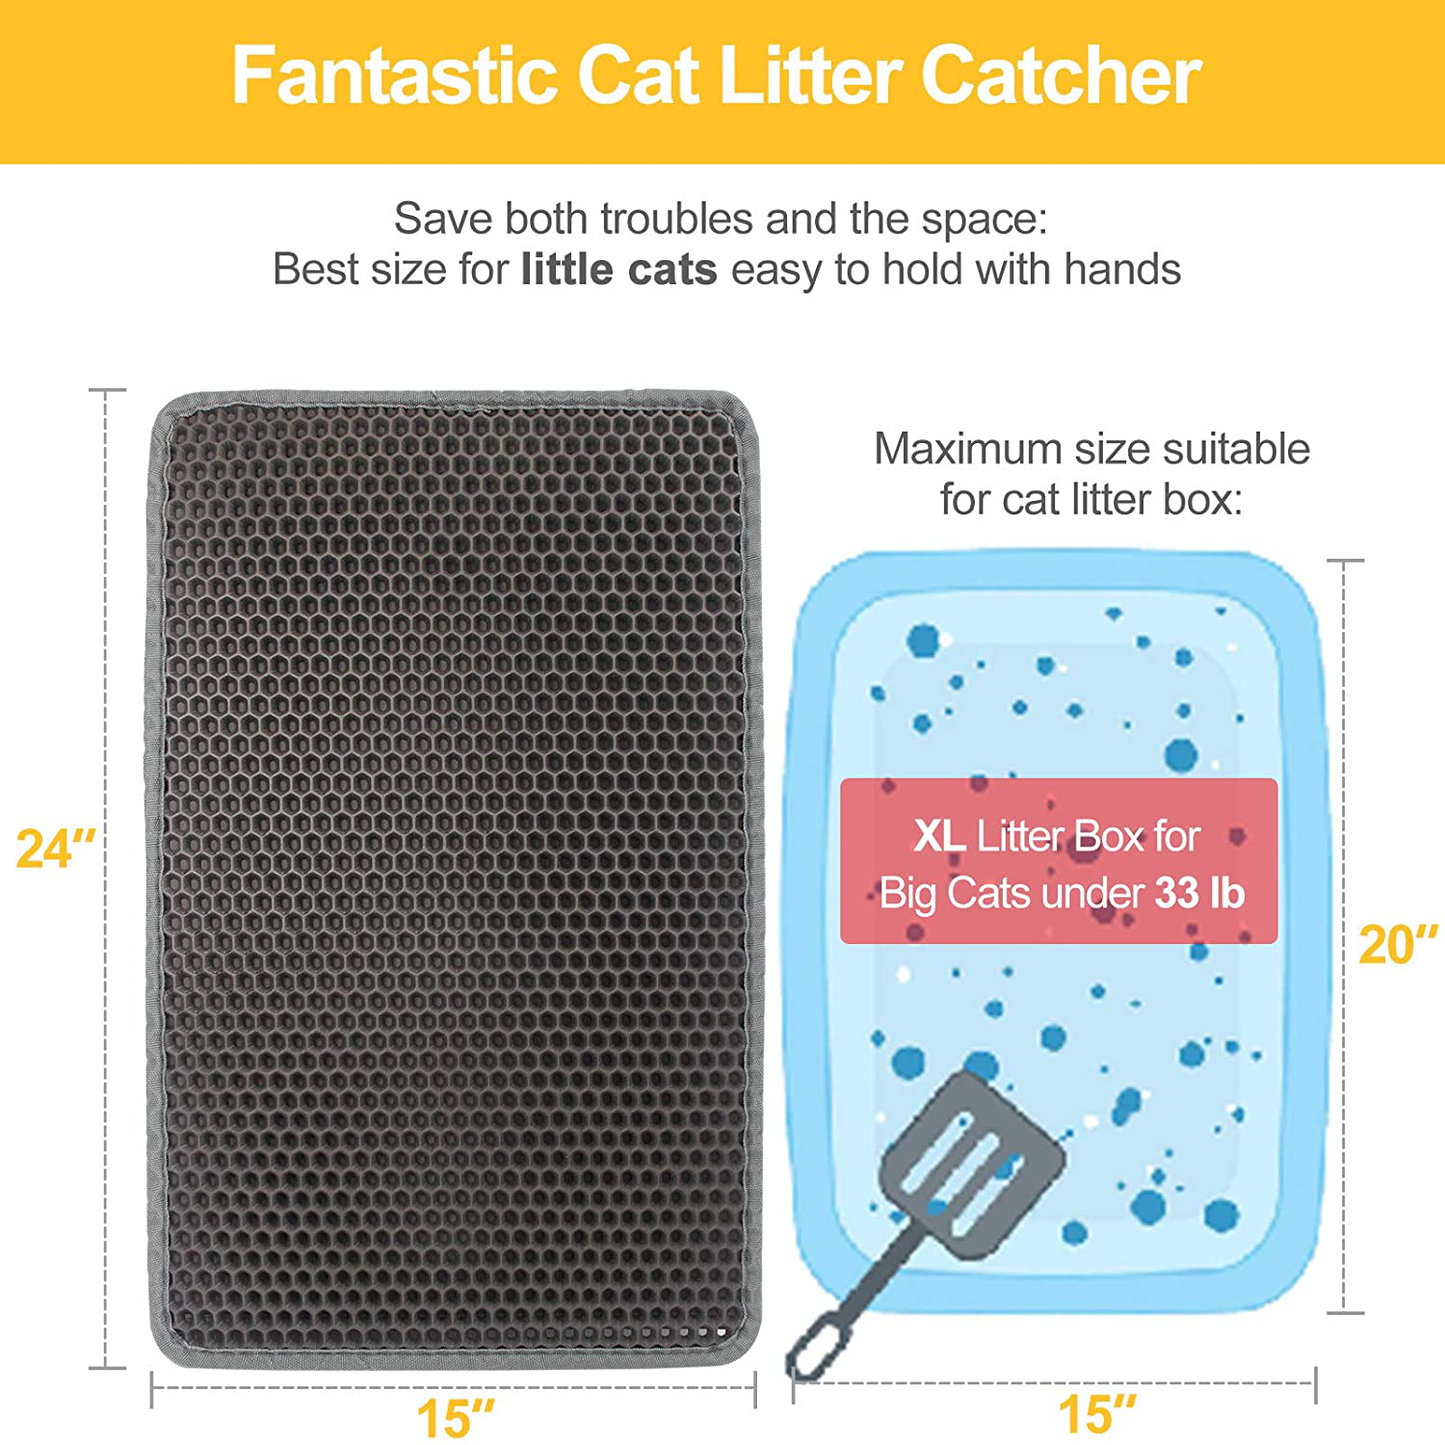 Letoo Cat Litter Mat Trapping for Litter Box, No-Toxic & Super Size, Urine & Waterproof, Honeycomb Double Layer anti Tracking Kitty Mats, No Phthalate, Washable Easy Clean